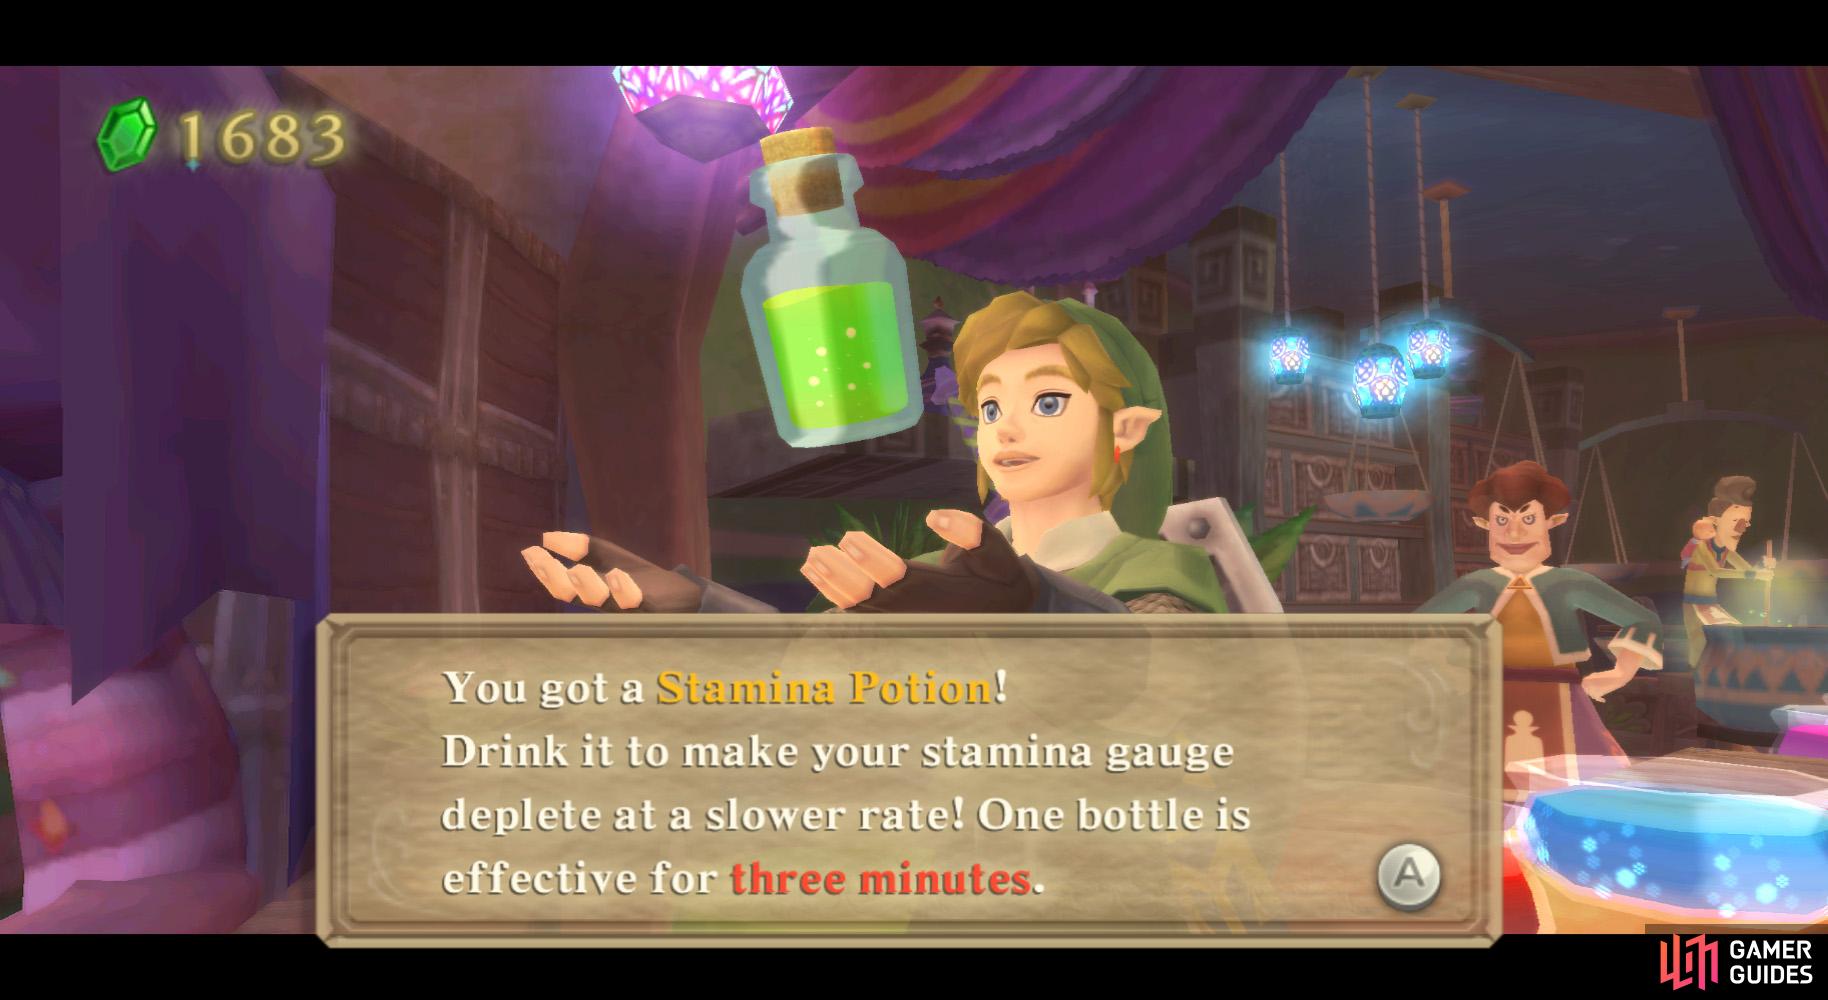 Head to the Bazaar and buy two Stamina Potions (or at least one).